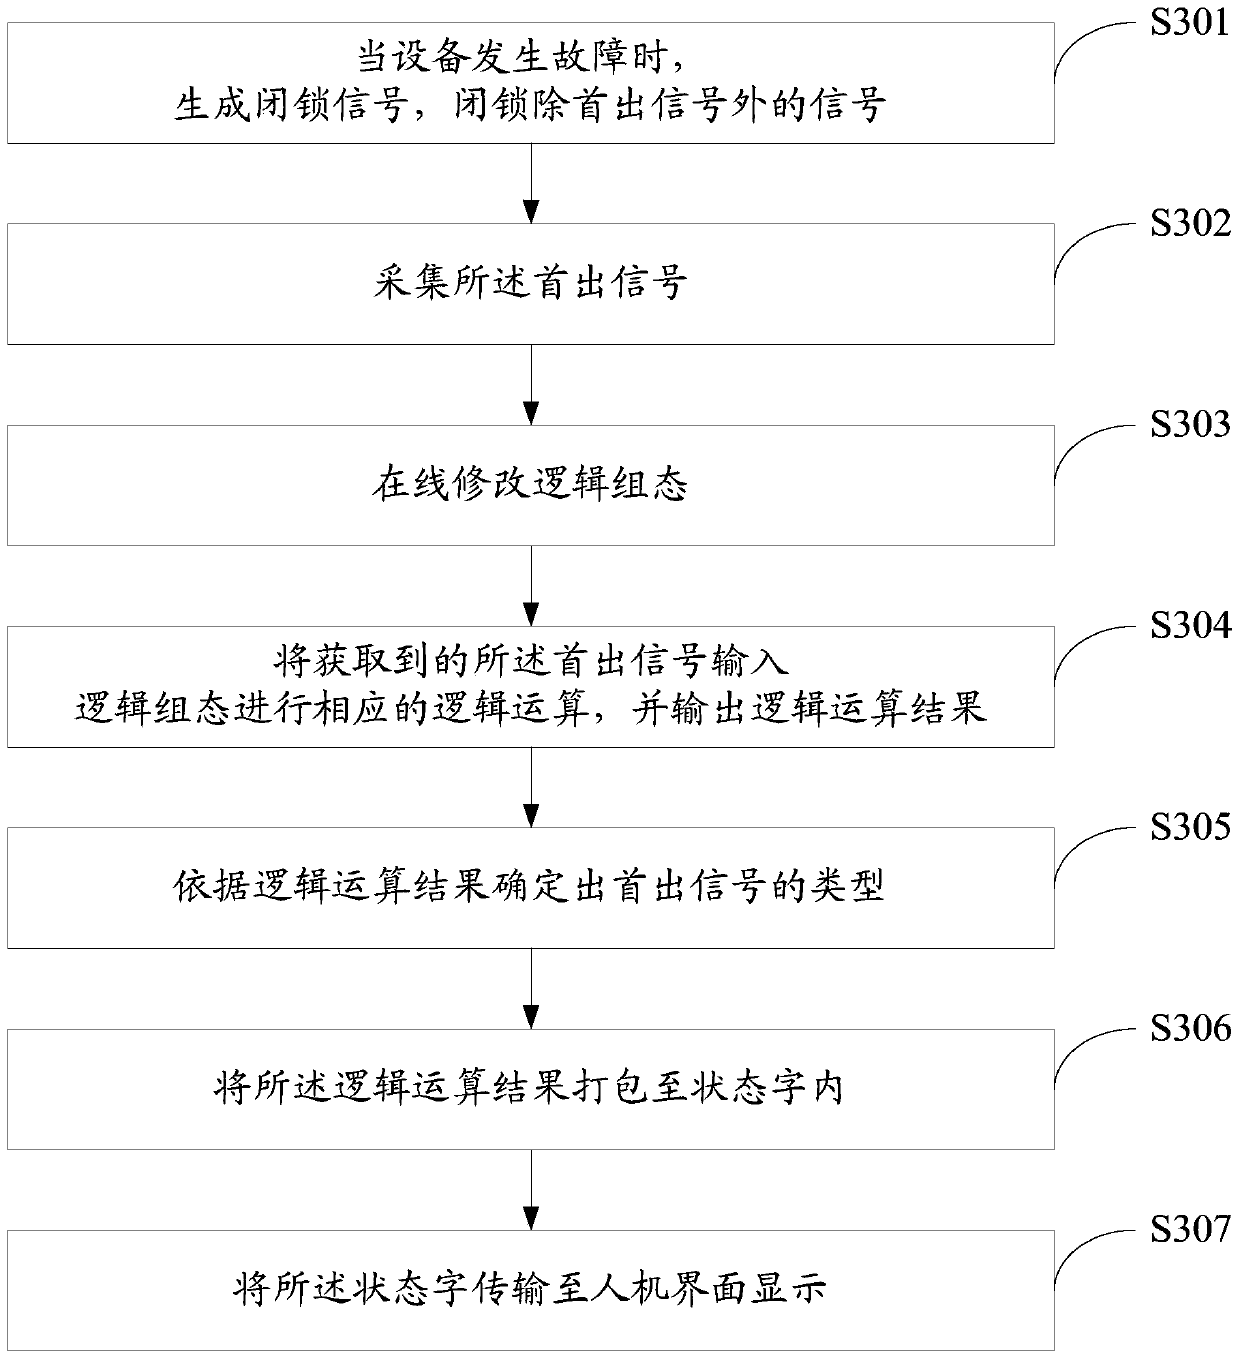 Fault diagnosis method and system for nuclear power plant equipment